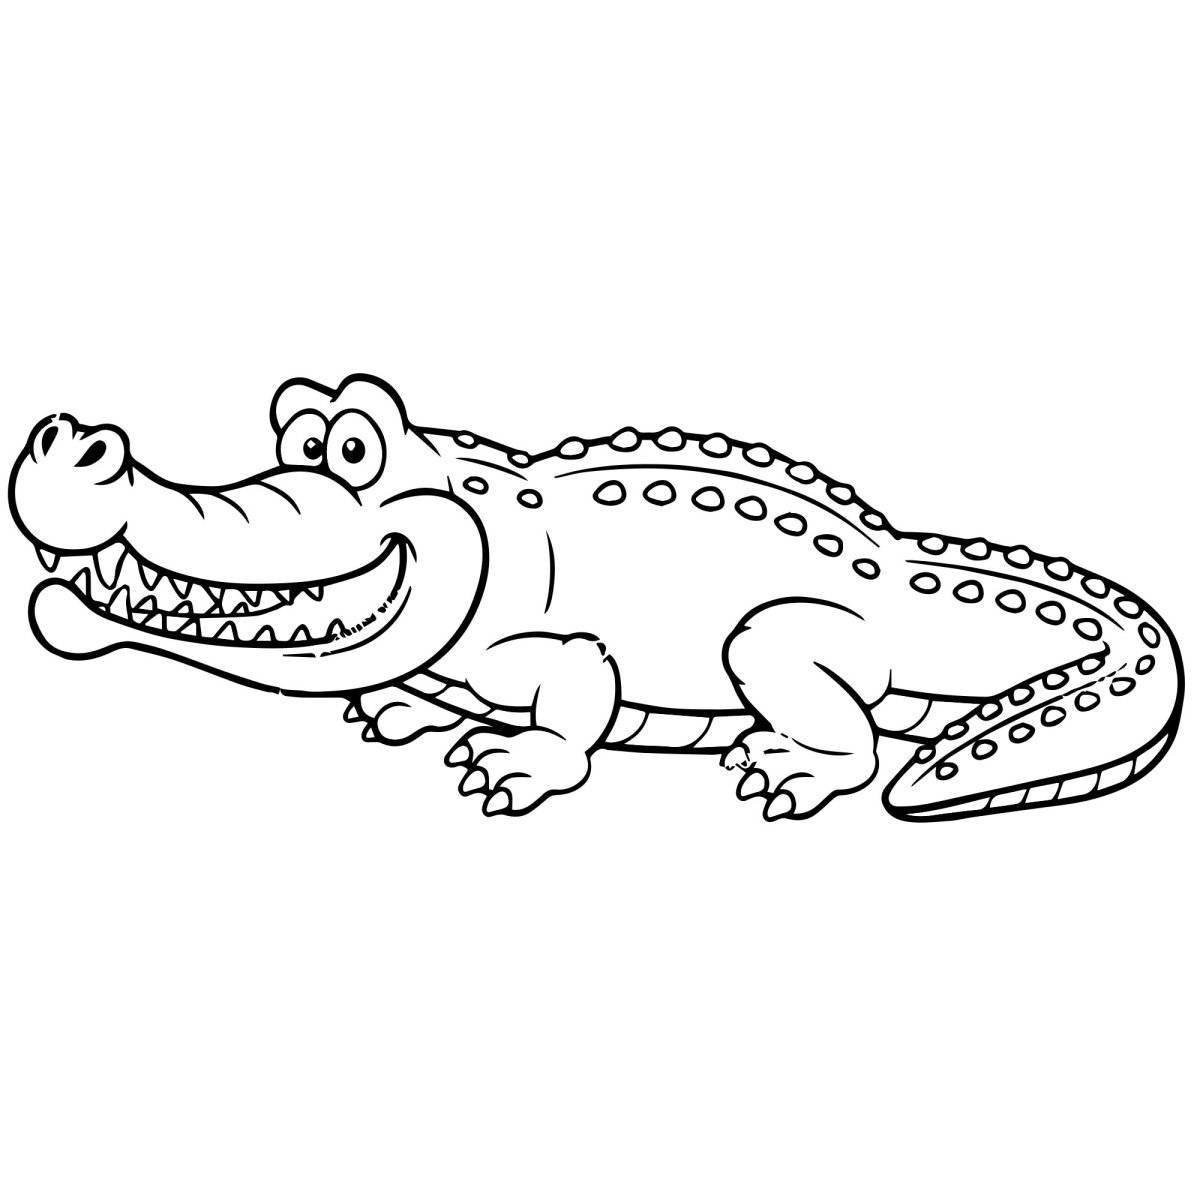 Fun crocodile coloring book for 3-4 year olds